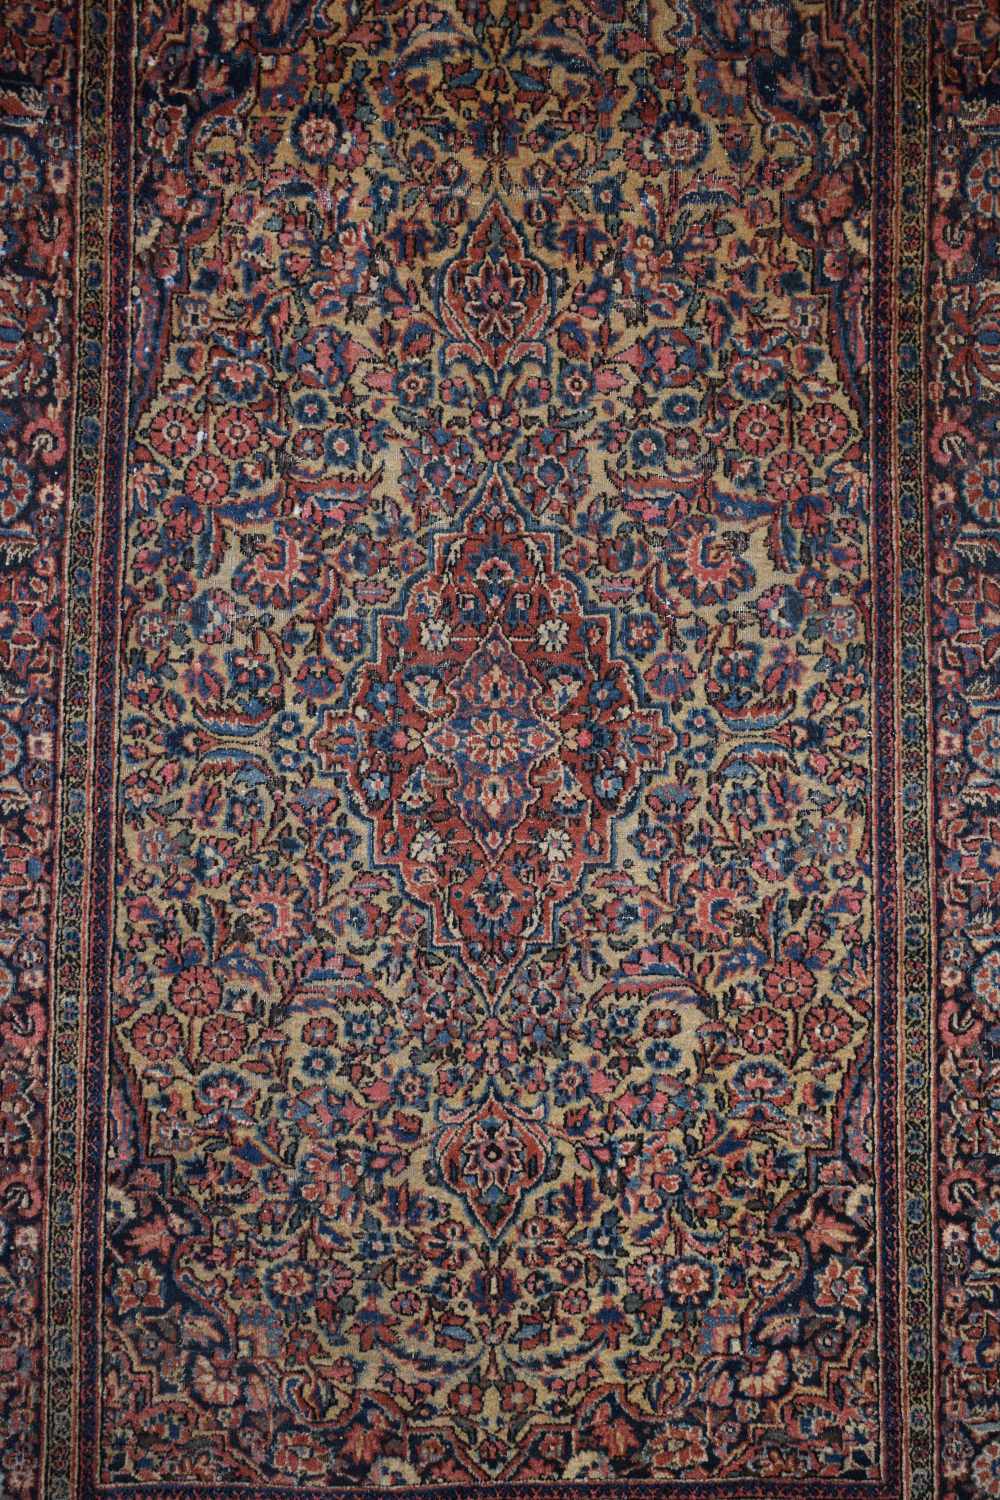 Kashan rug, west Persia, circa 1920s, 7ft. x 4ft. 2in. 2.13m. x 1.27m. Overall wear with some - Image 7 of 9